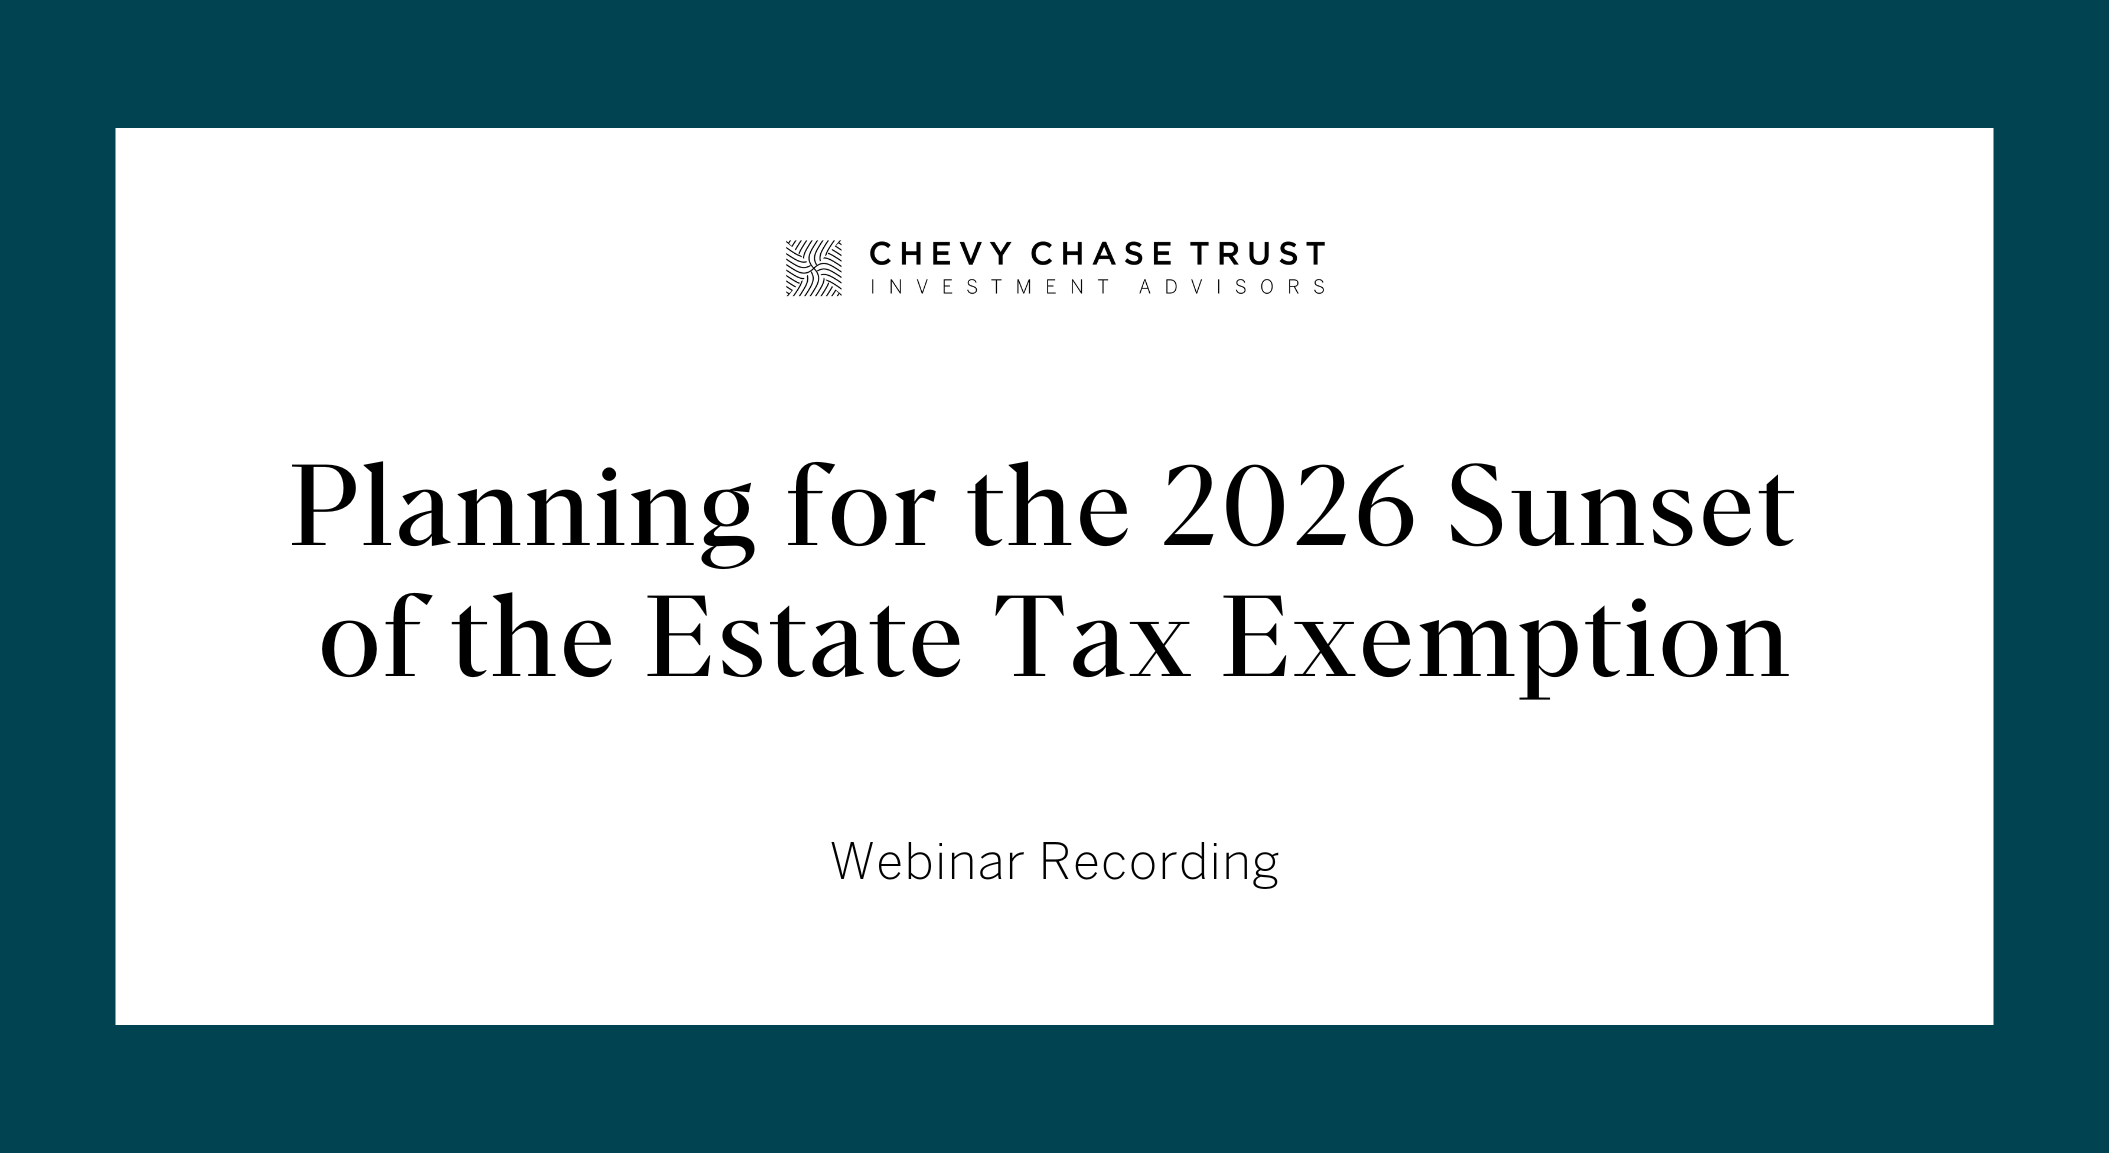 “Planning for the 2026 Sunset of the Estate Tax Exemption” webinar recording